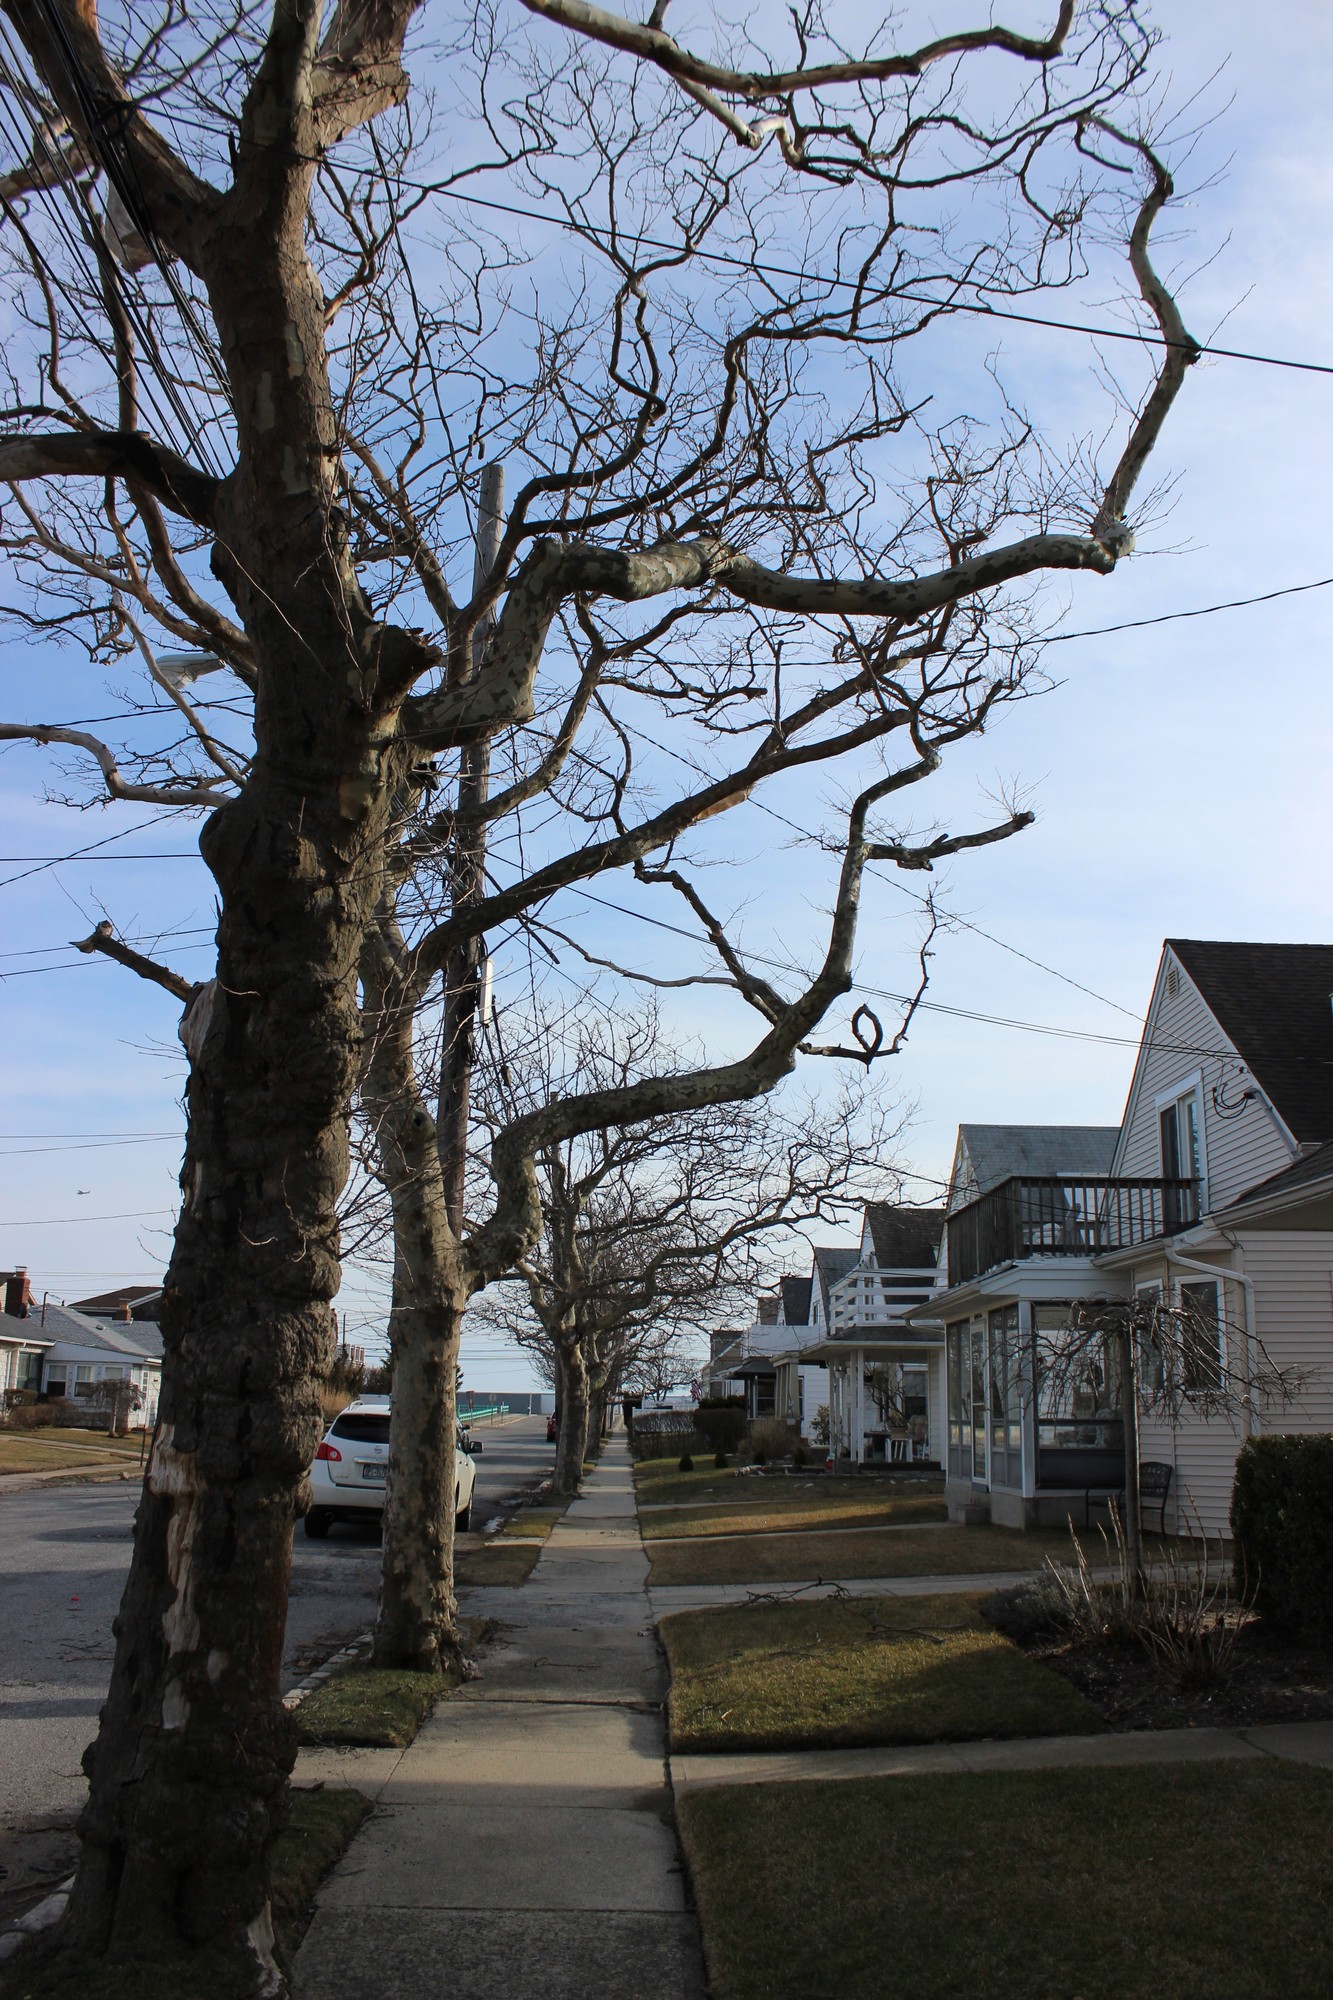 The Village of Atlantic Beach is beginning a tree removal program within the next two weeks. Along Bermuda Street, several trees are due to be cut down.